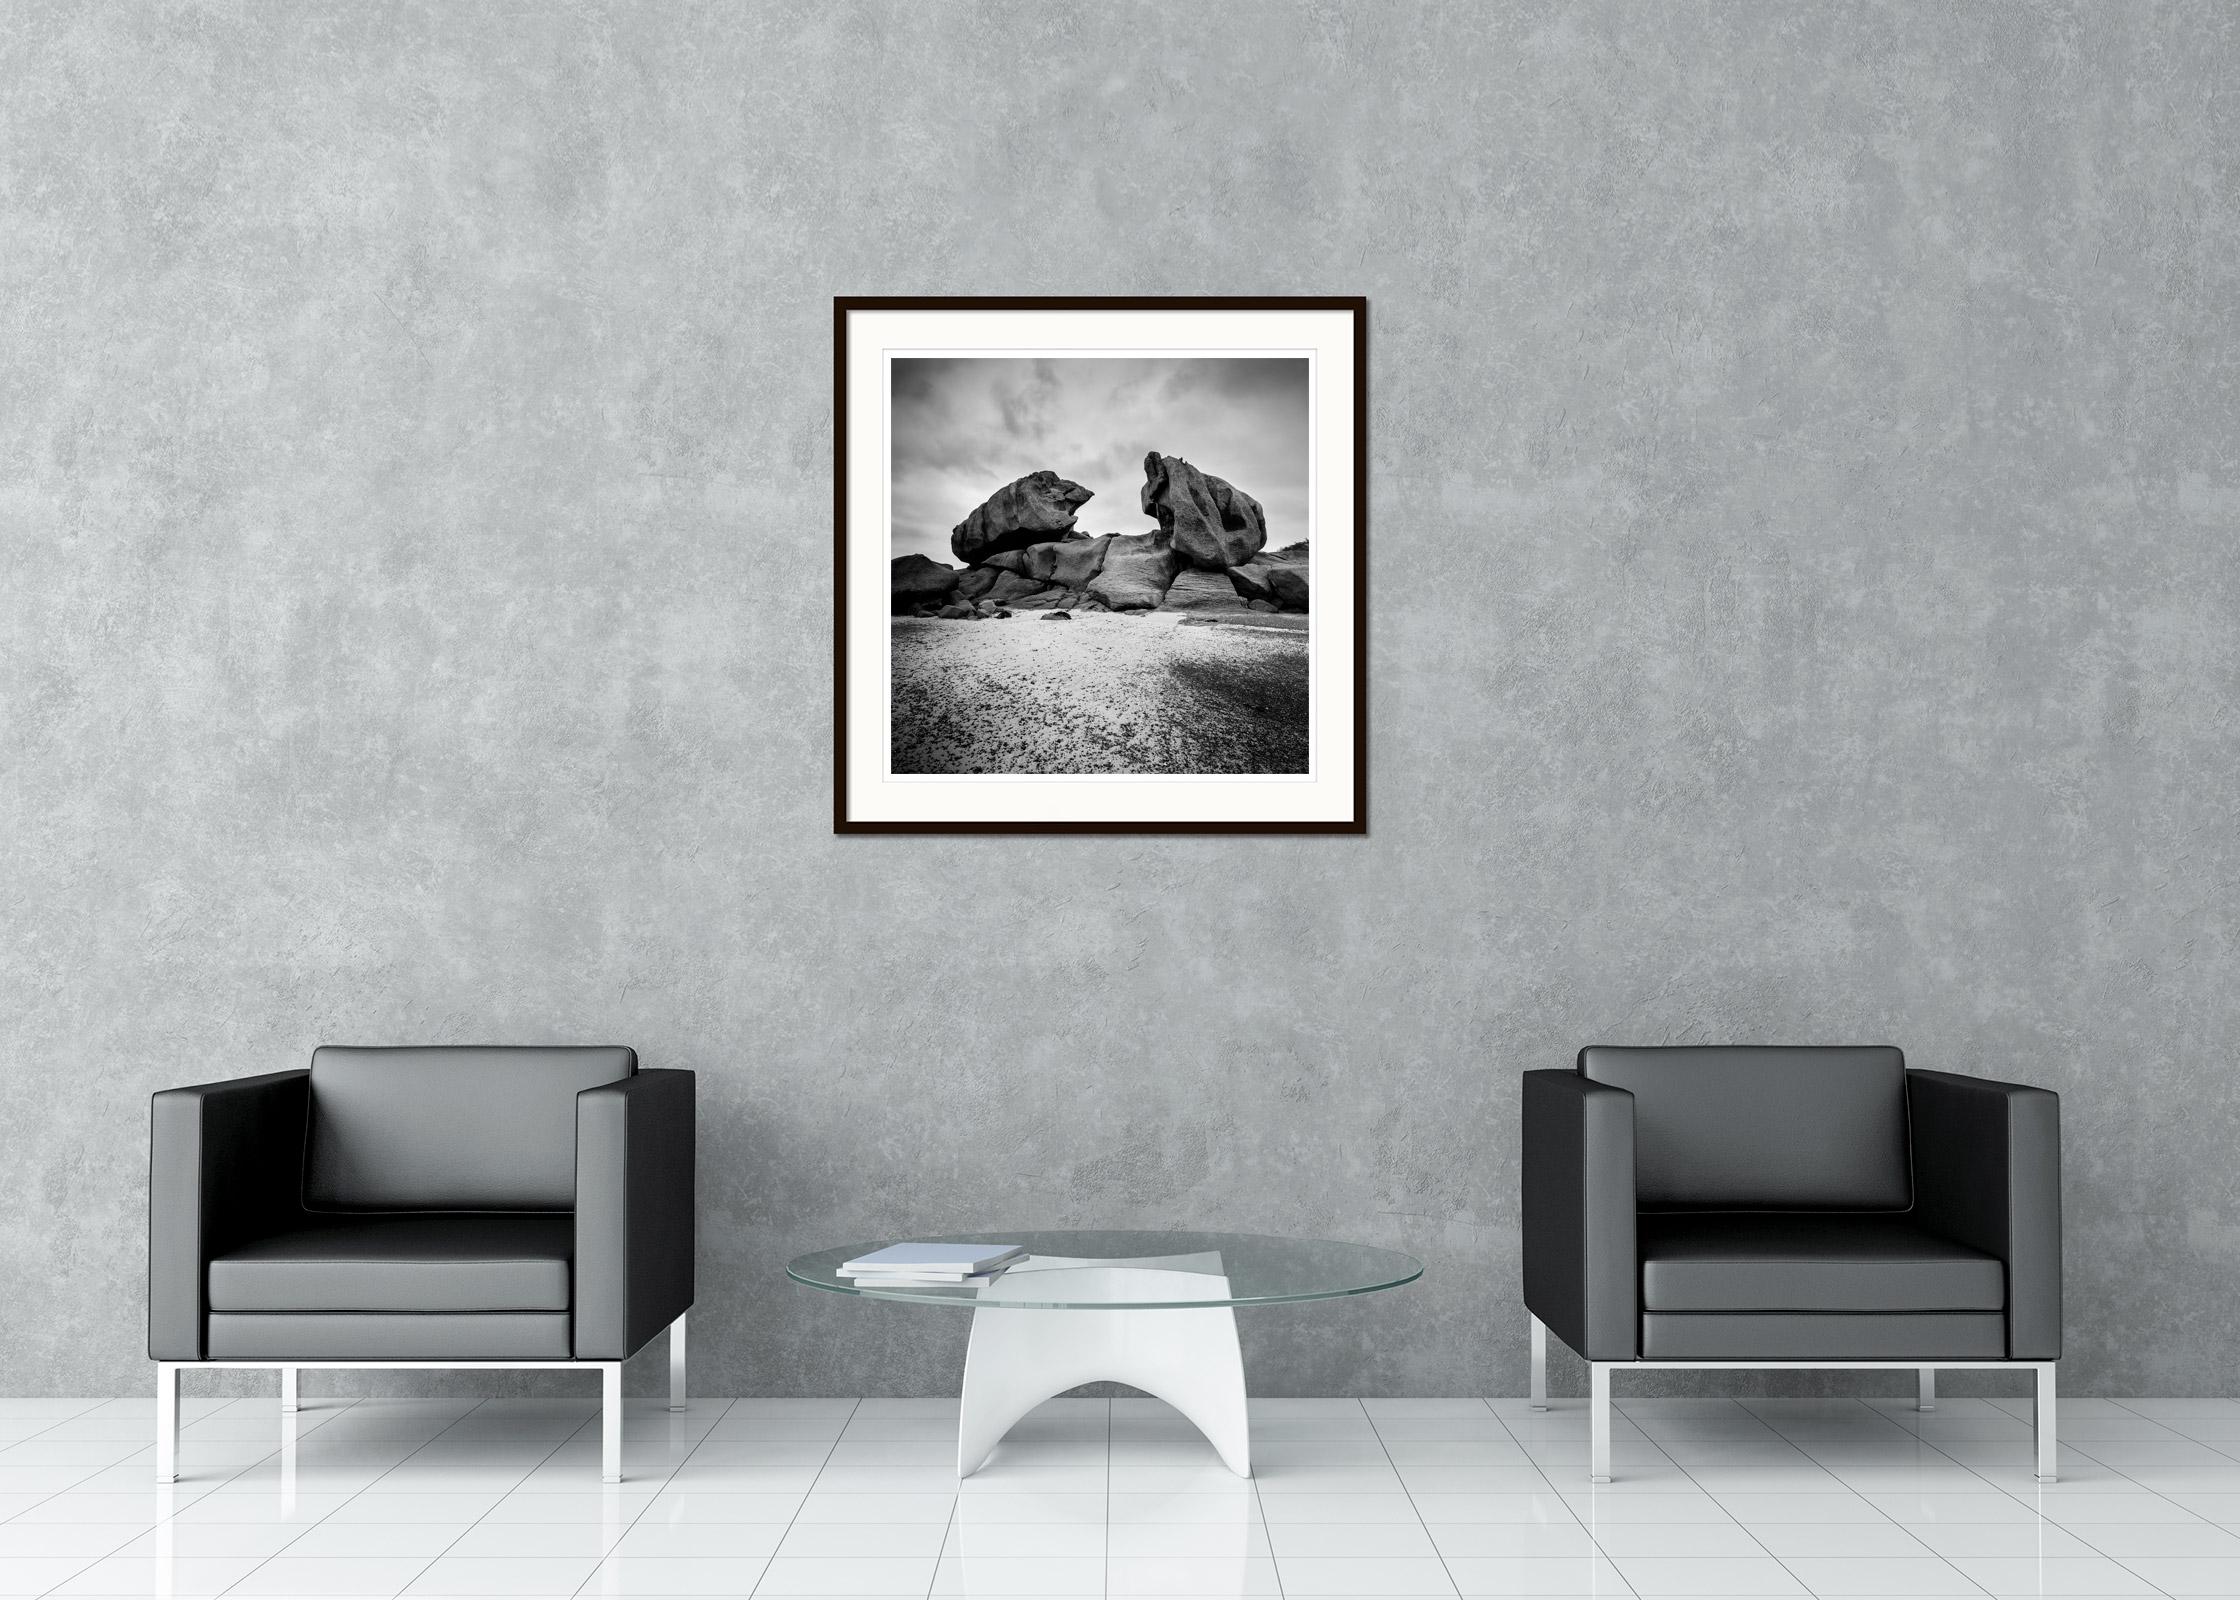 Black and white fine art landscape photography. Crab Claws Rock, Granite Coast, Brittany, France. Archival pigment ink print as part of a limited edition of 9. All Gerald Berghammer prints are made to order in limited editions on Hahnemuehle Photo